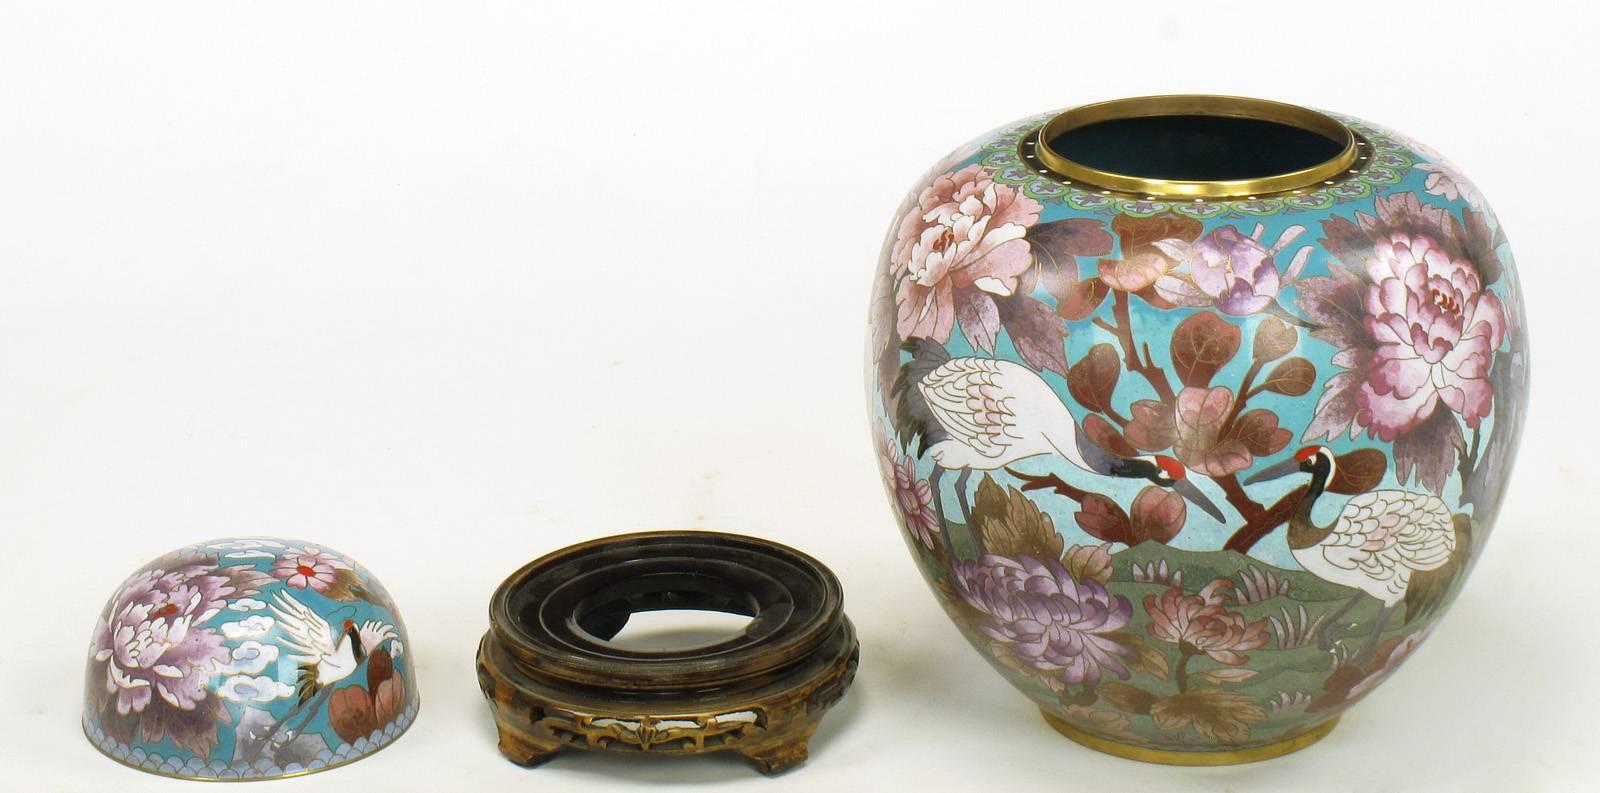 Late 20th Century Pair of Chinese Cloisonné Urns with Red-Crowned Cranes and Peonies For Sale